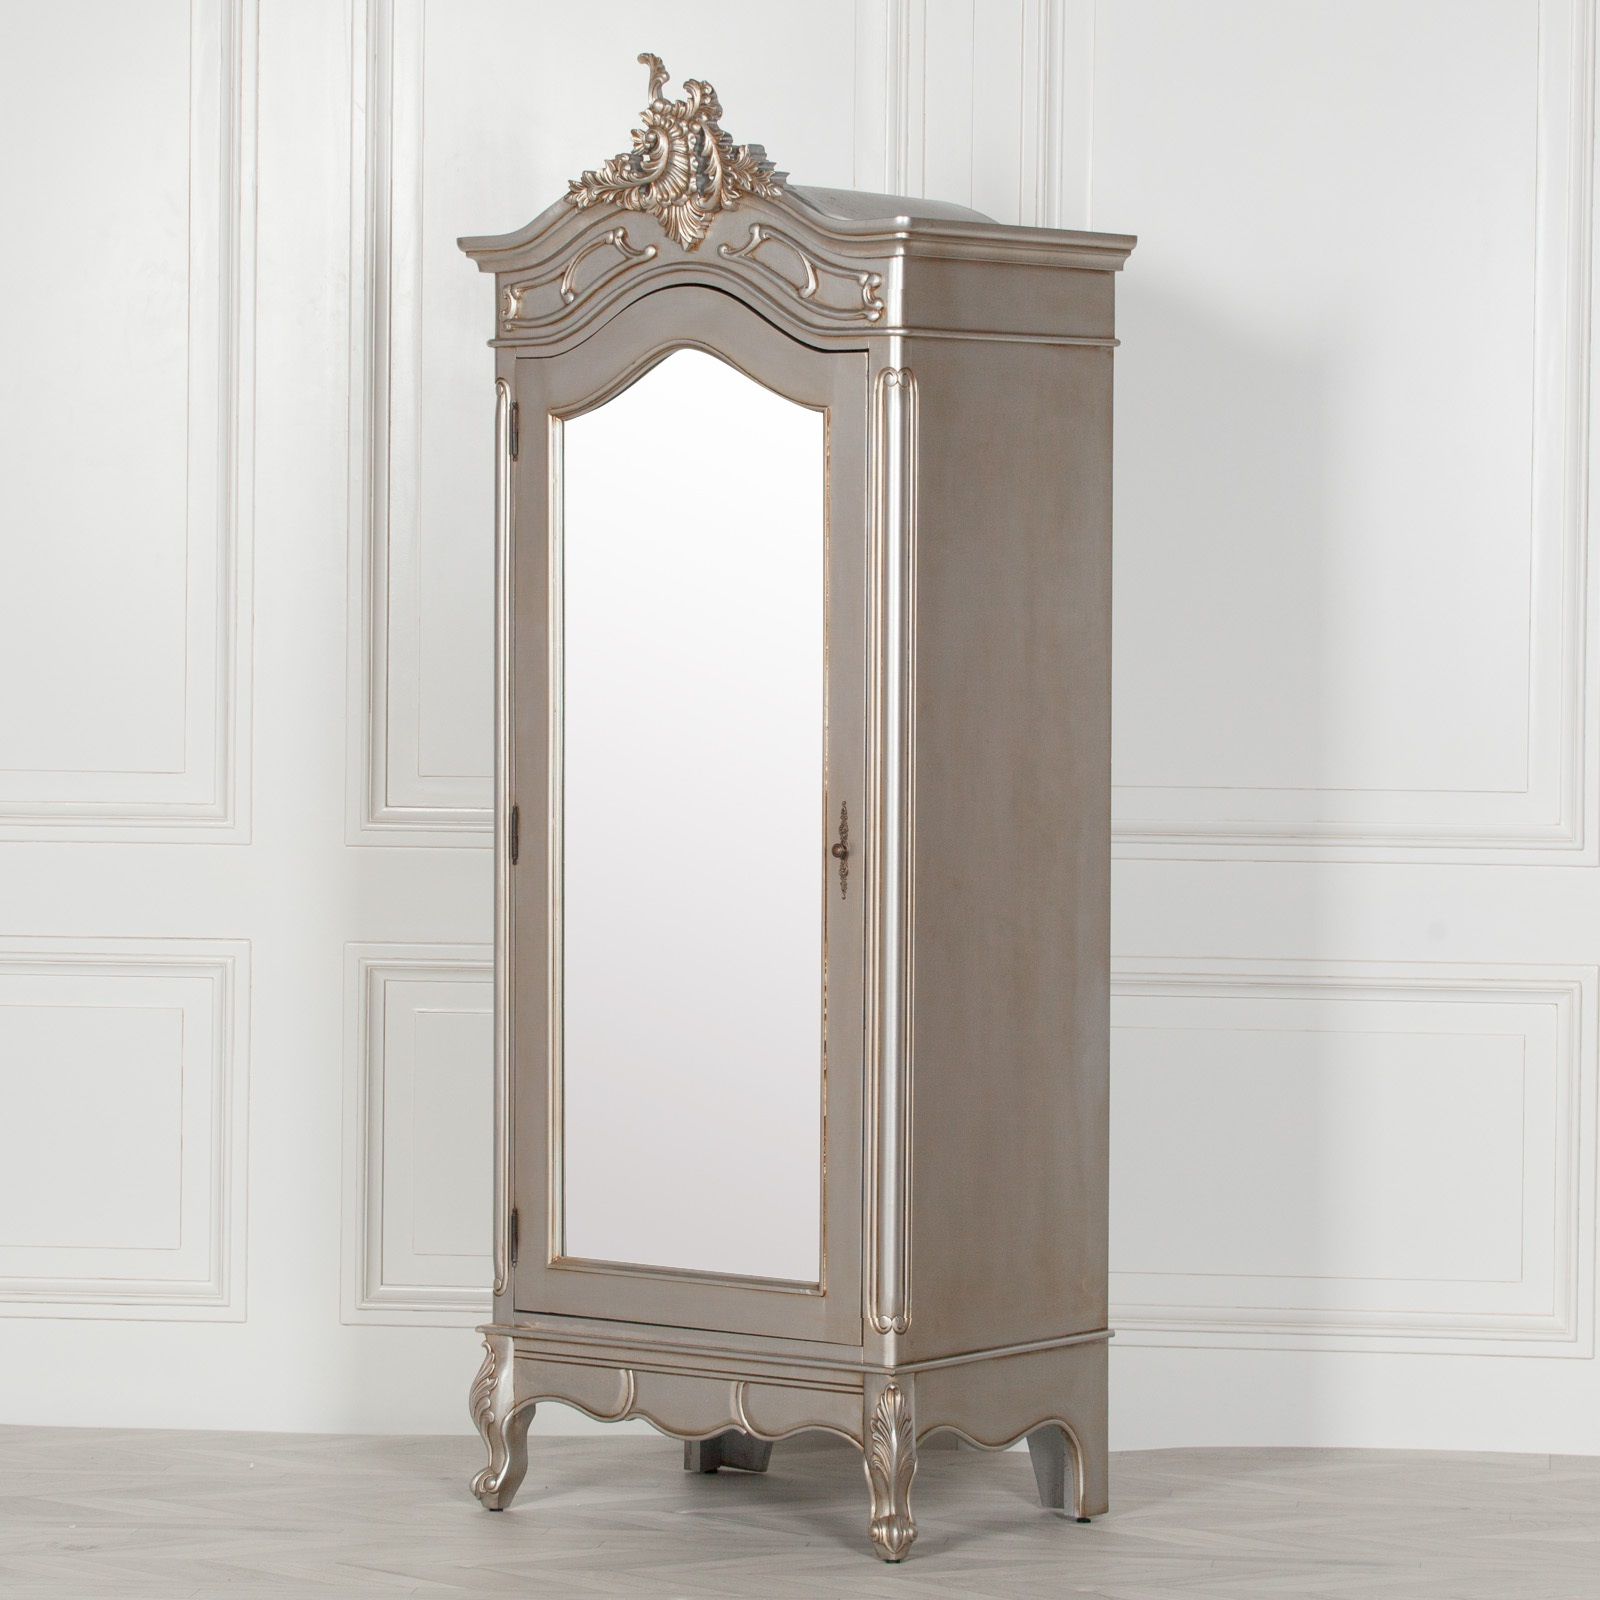 French Style Antique Silver Armoire Wardrobe Mirror Door Intended For Single French Wardrobes (View 14 of 20)